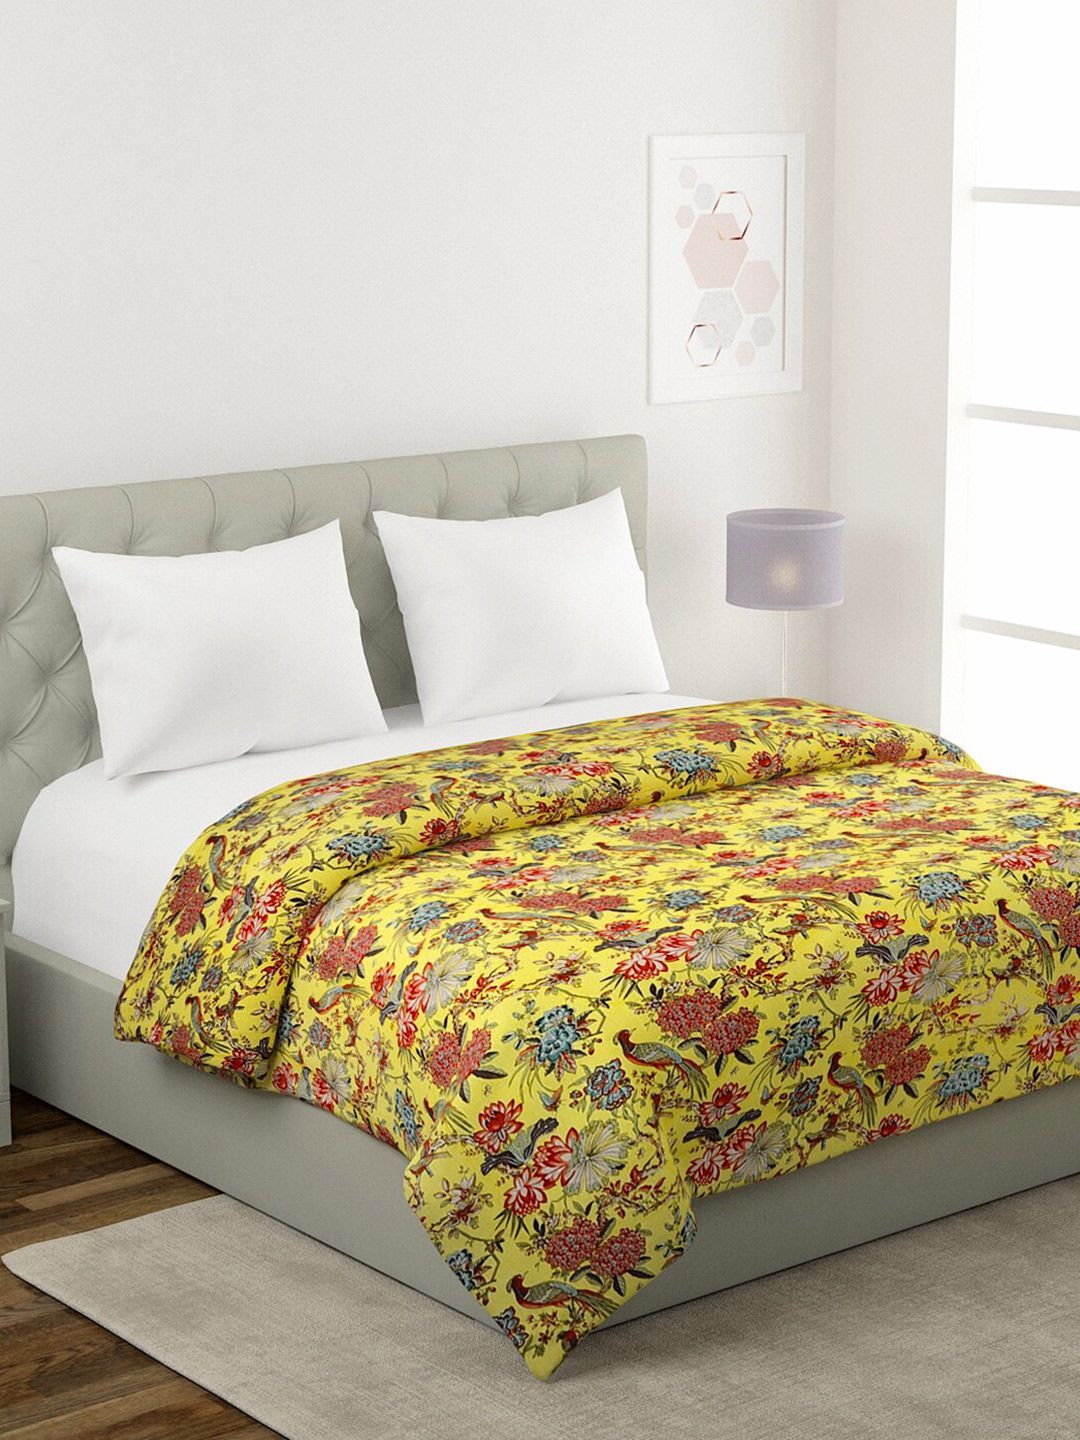 Rajasthan Decor Yellow Floral Printed 200 GSM Mild Winter Reversible Double Bed Comforter Price in India